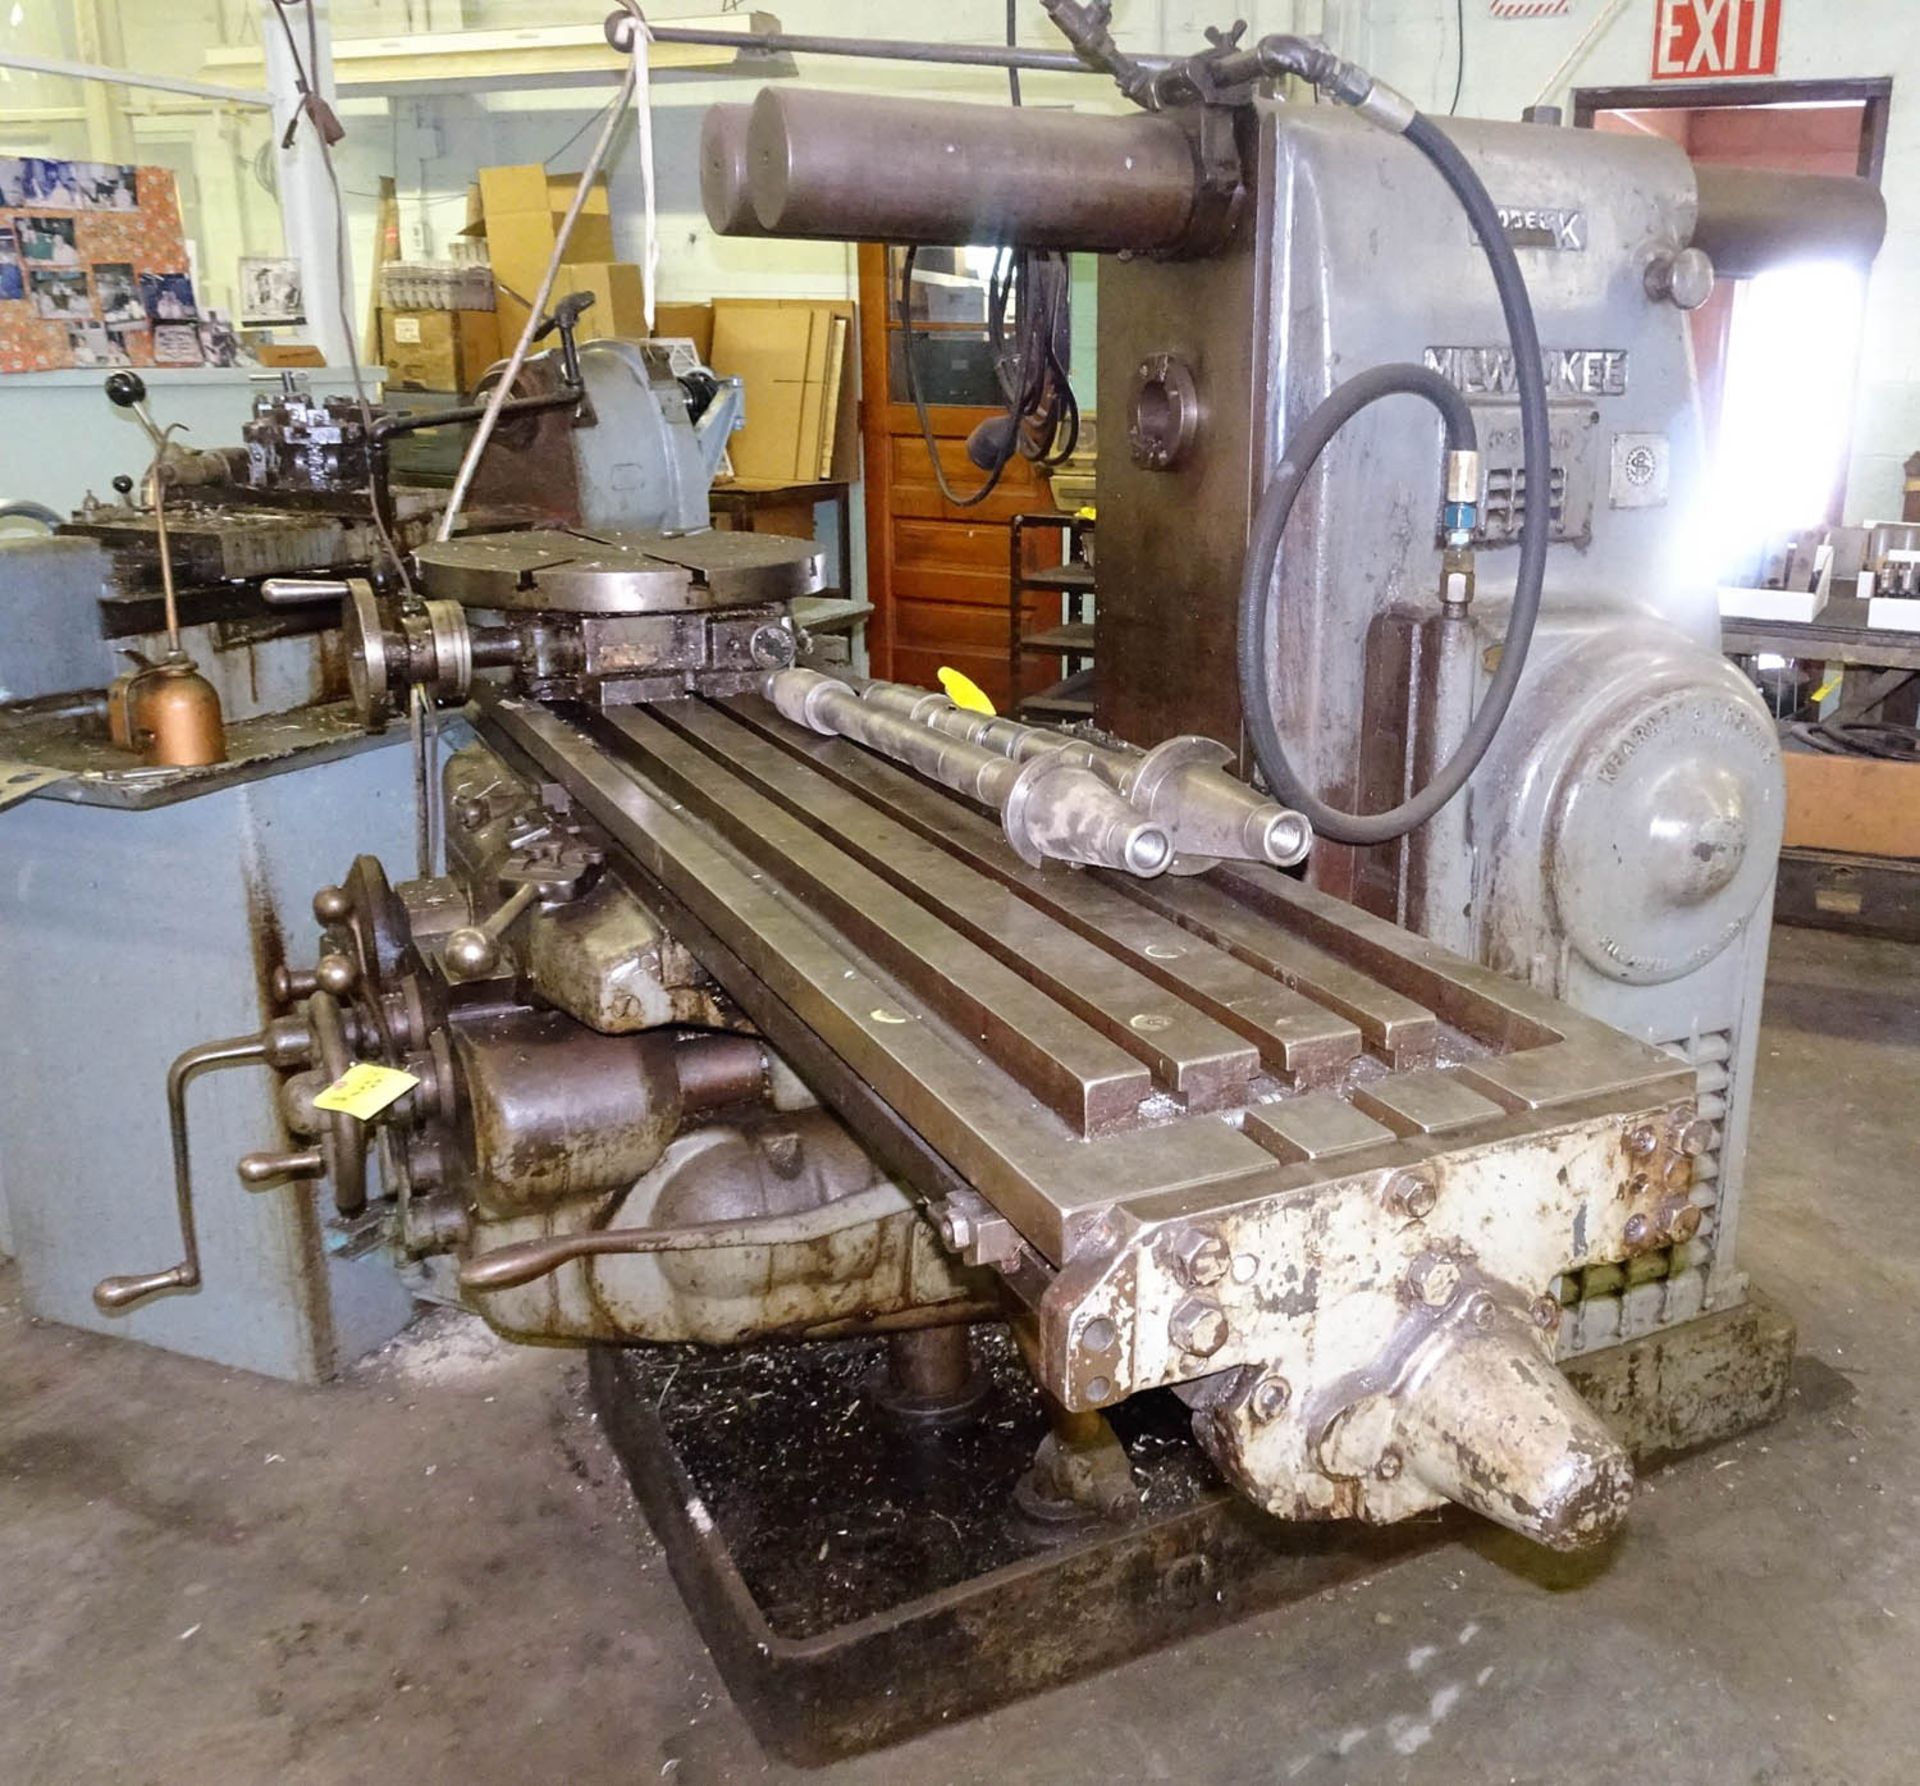 MILWAUKEE MDL. K HORIZONTAL MILLING MACHINE, WITH APPROXIMATELY 60" X 15" T-SLOT TABLE, S/N 6-